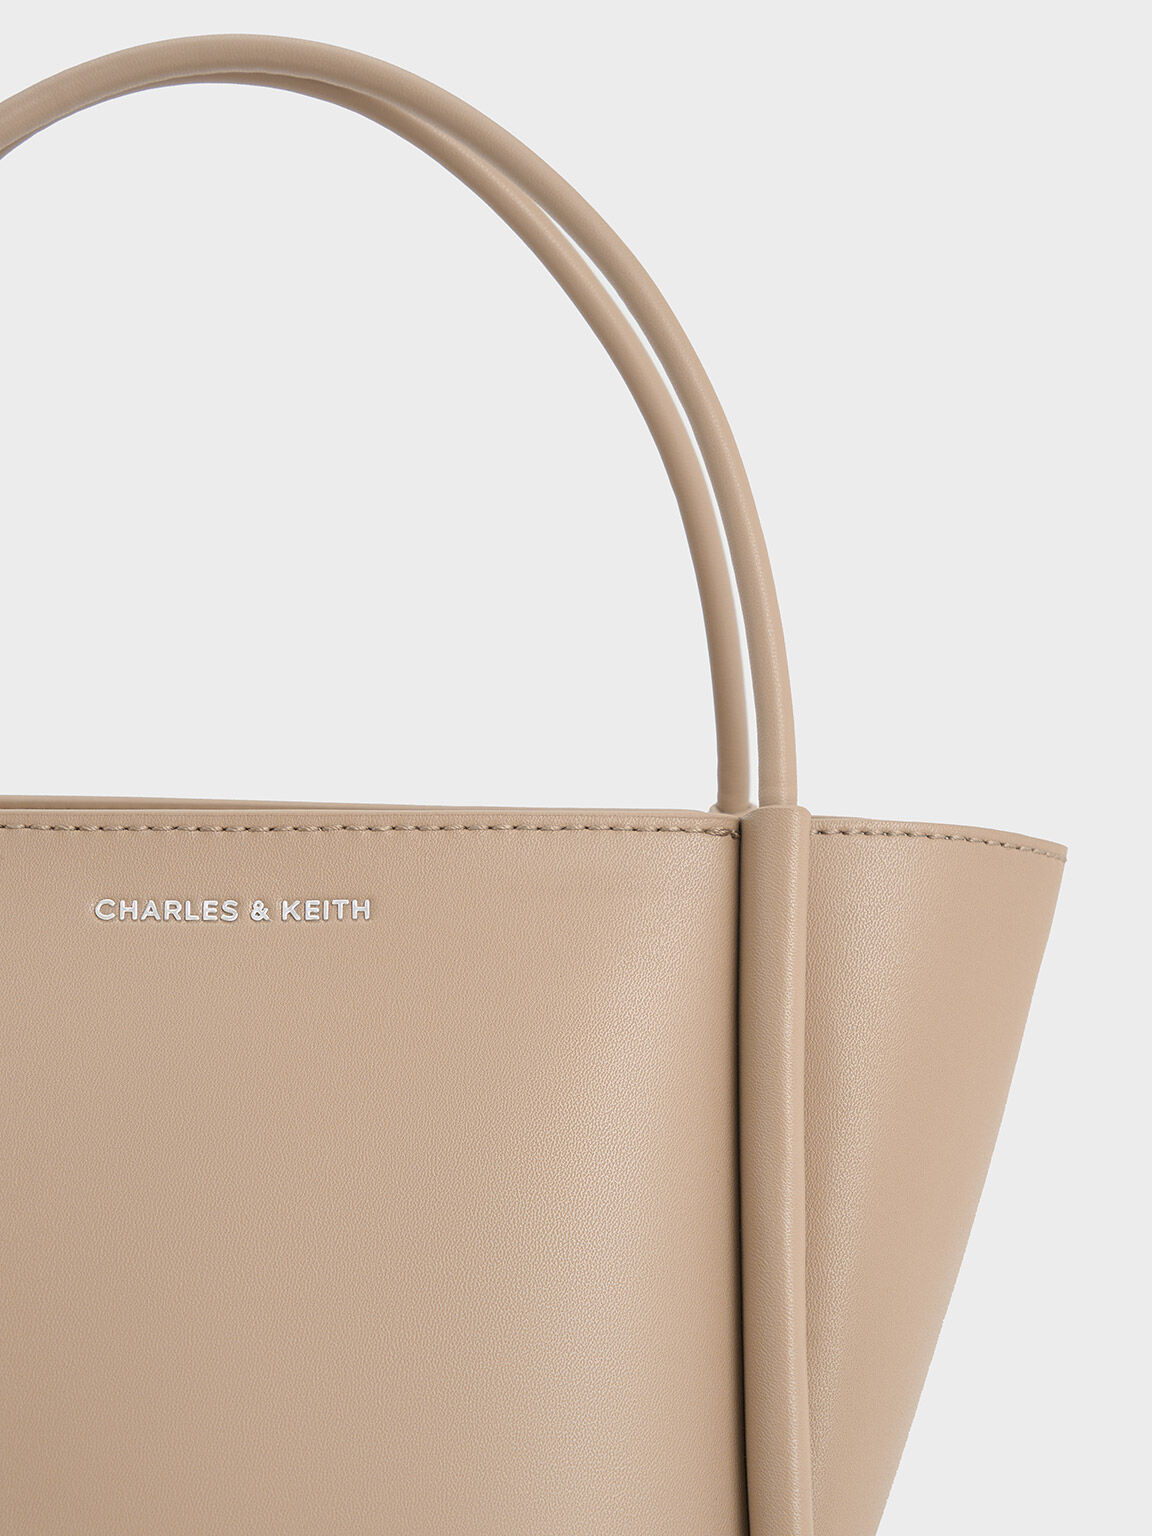 CHARLES & KEITH Canada - Shop the official site